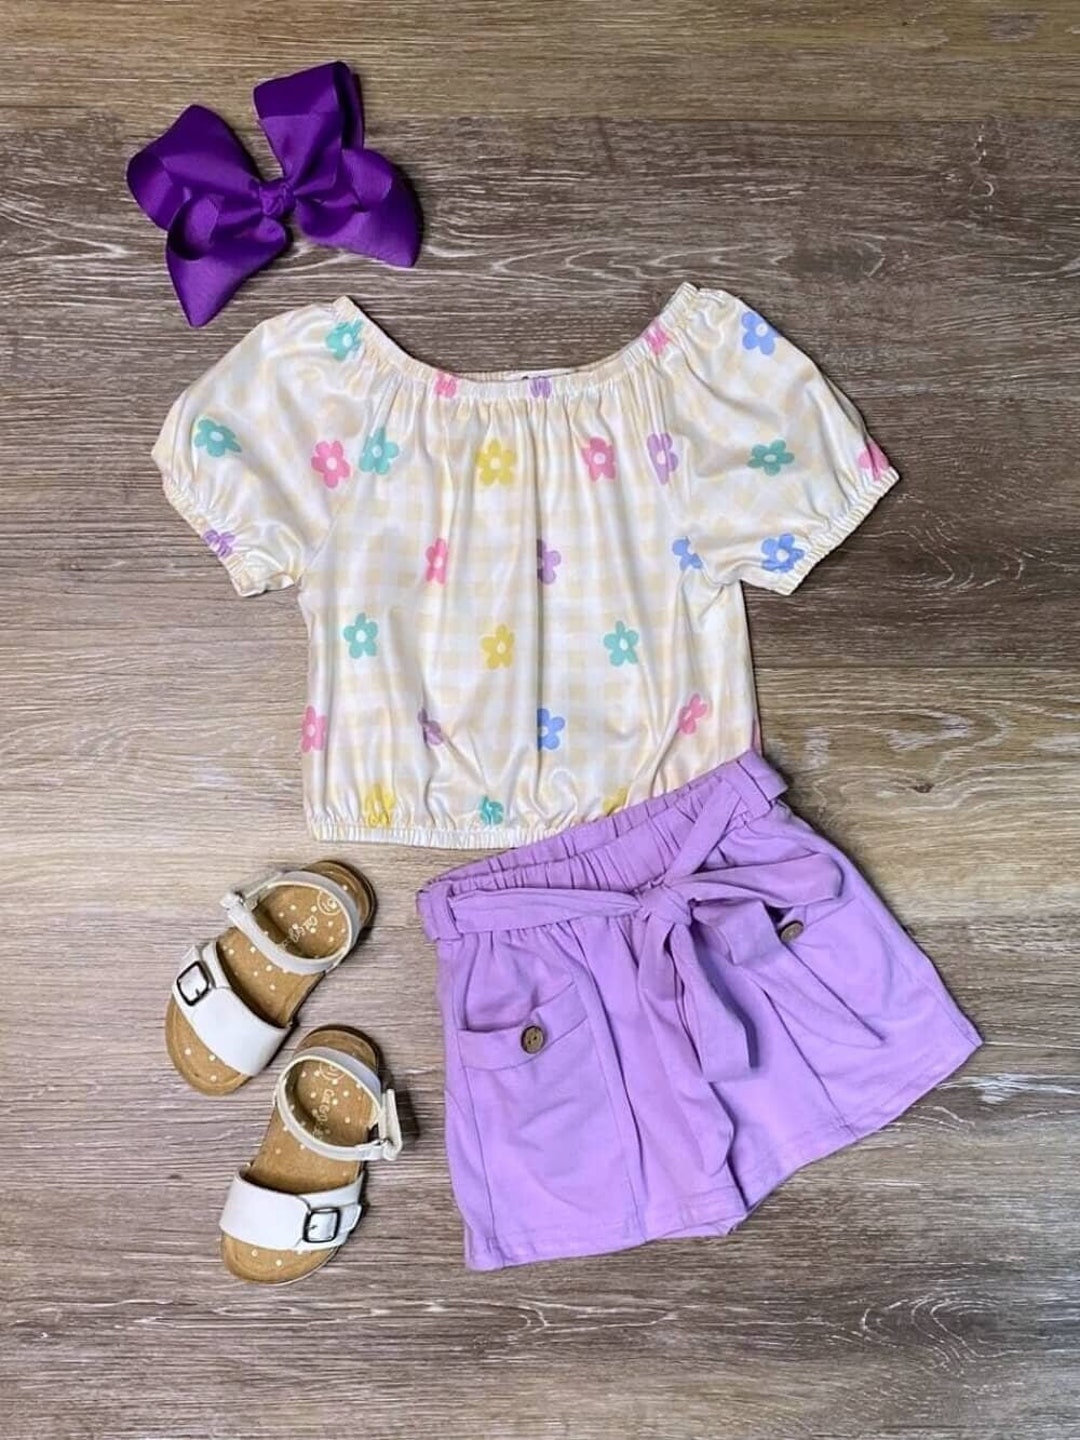 Crazy for Daisies Yellow & Purple Girls Shorts Outfit 4T